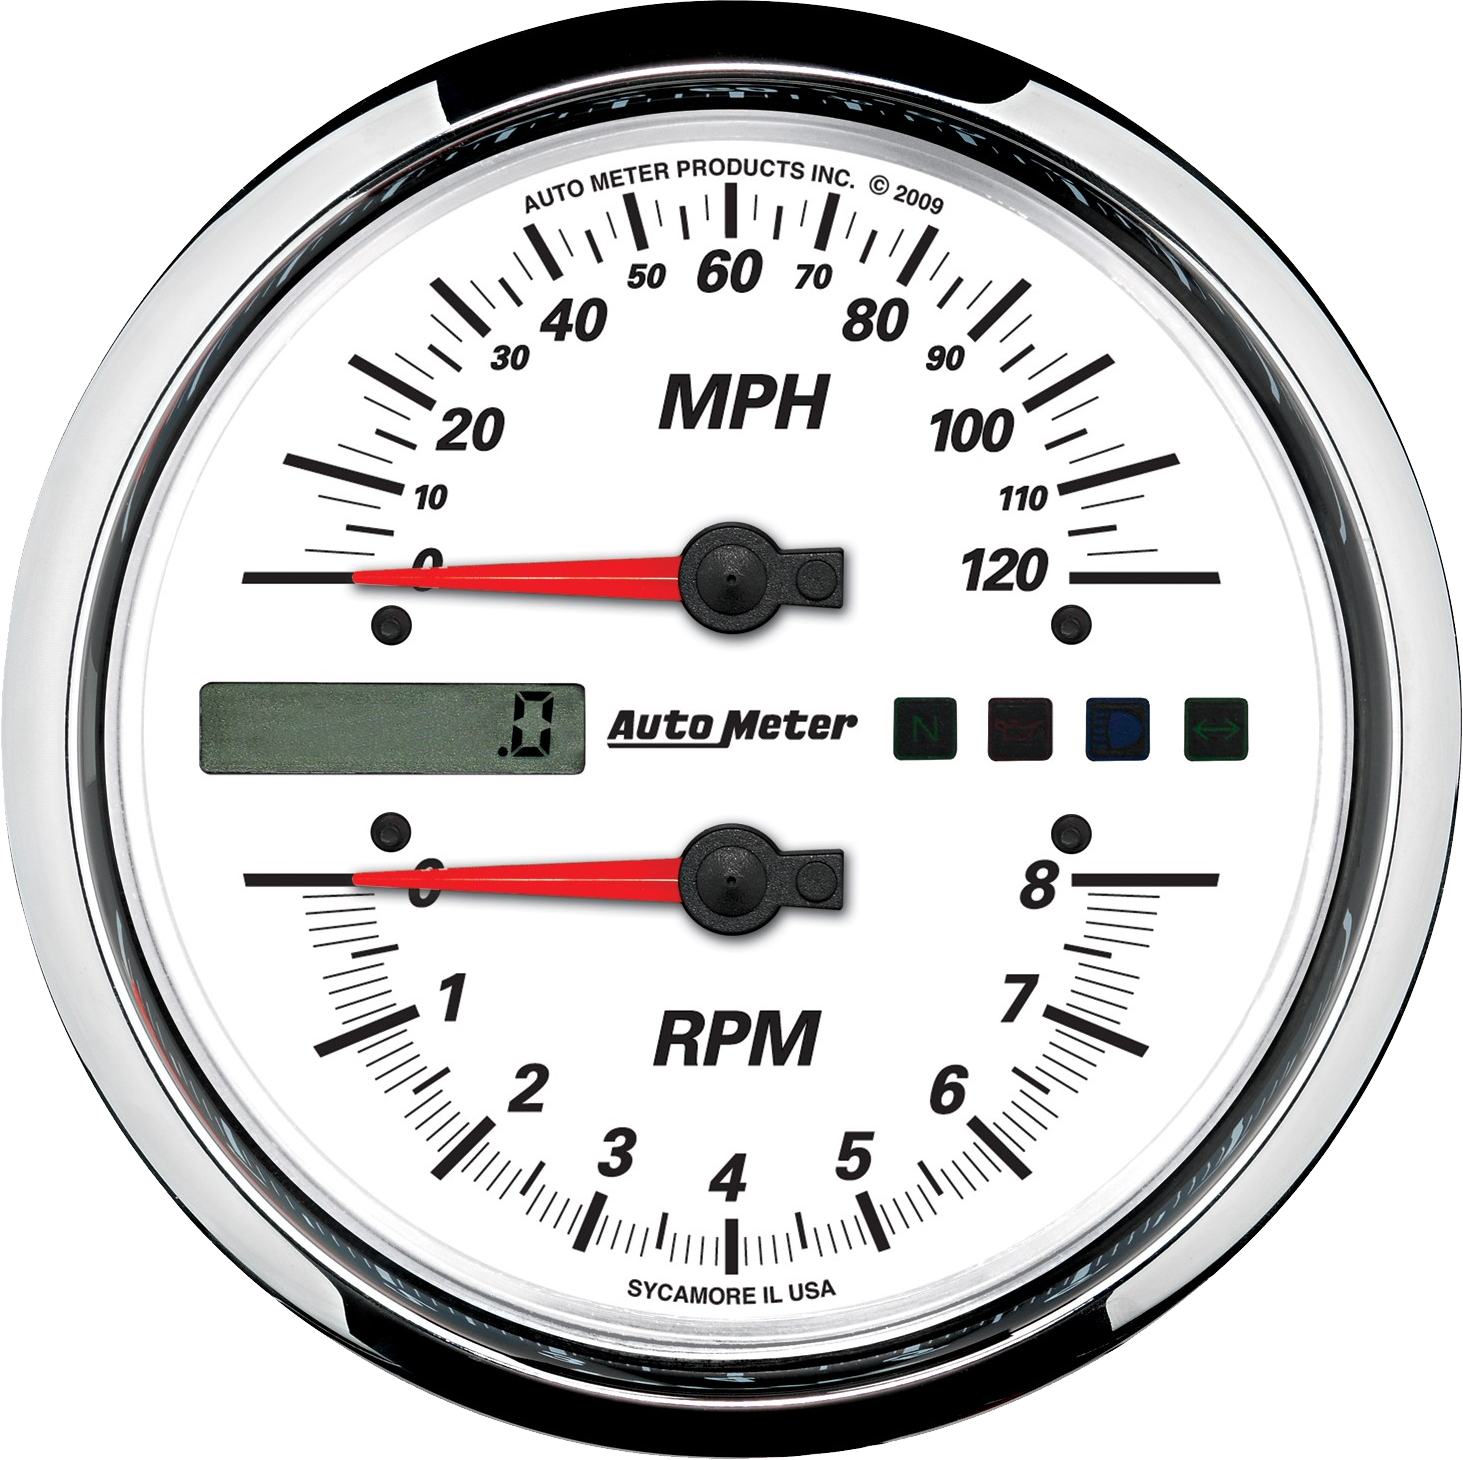 Motorcycle clipart meter. Speedometer png images free